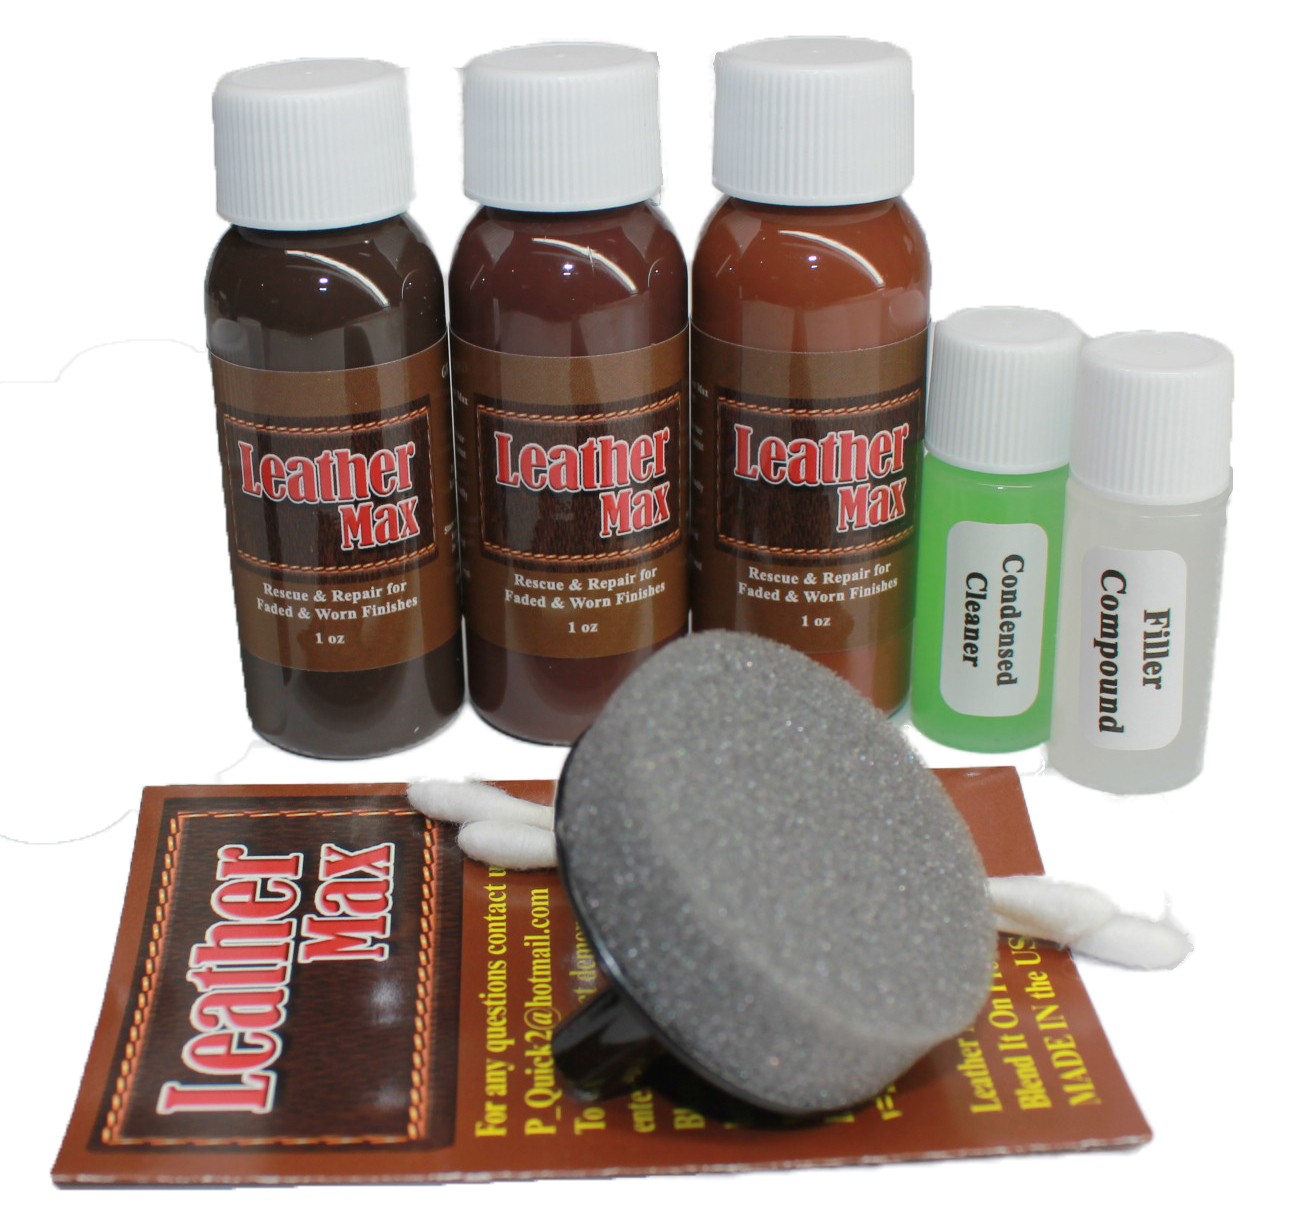 Leather Repair and Refinish for Handbags / Shoes / Boots / Jackets / Leather Max (Blood Red) - image 1 of 5